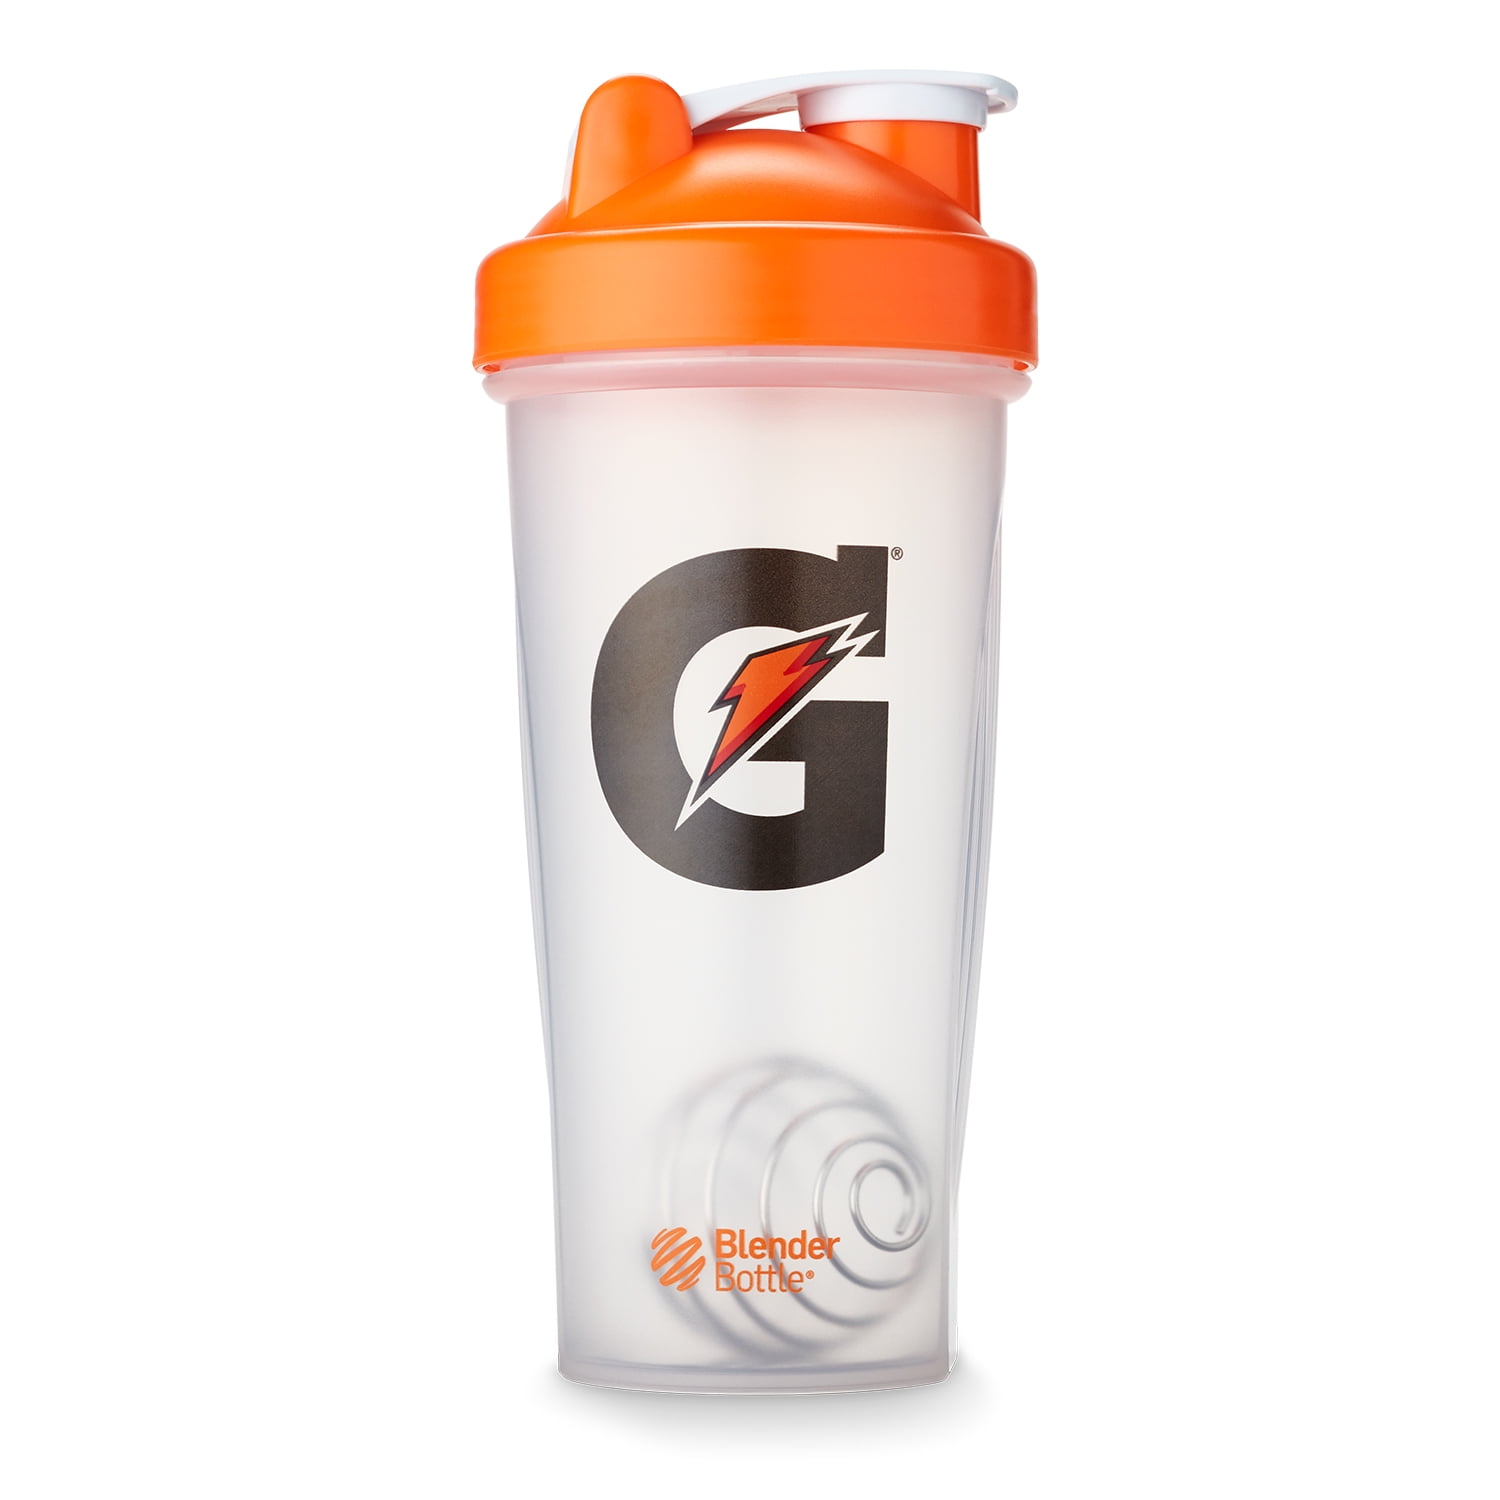 Glacier Freeze Blue One 4 Pack SOLD OUT Fast ship w/ tracking! Gatorade GX Pods 